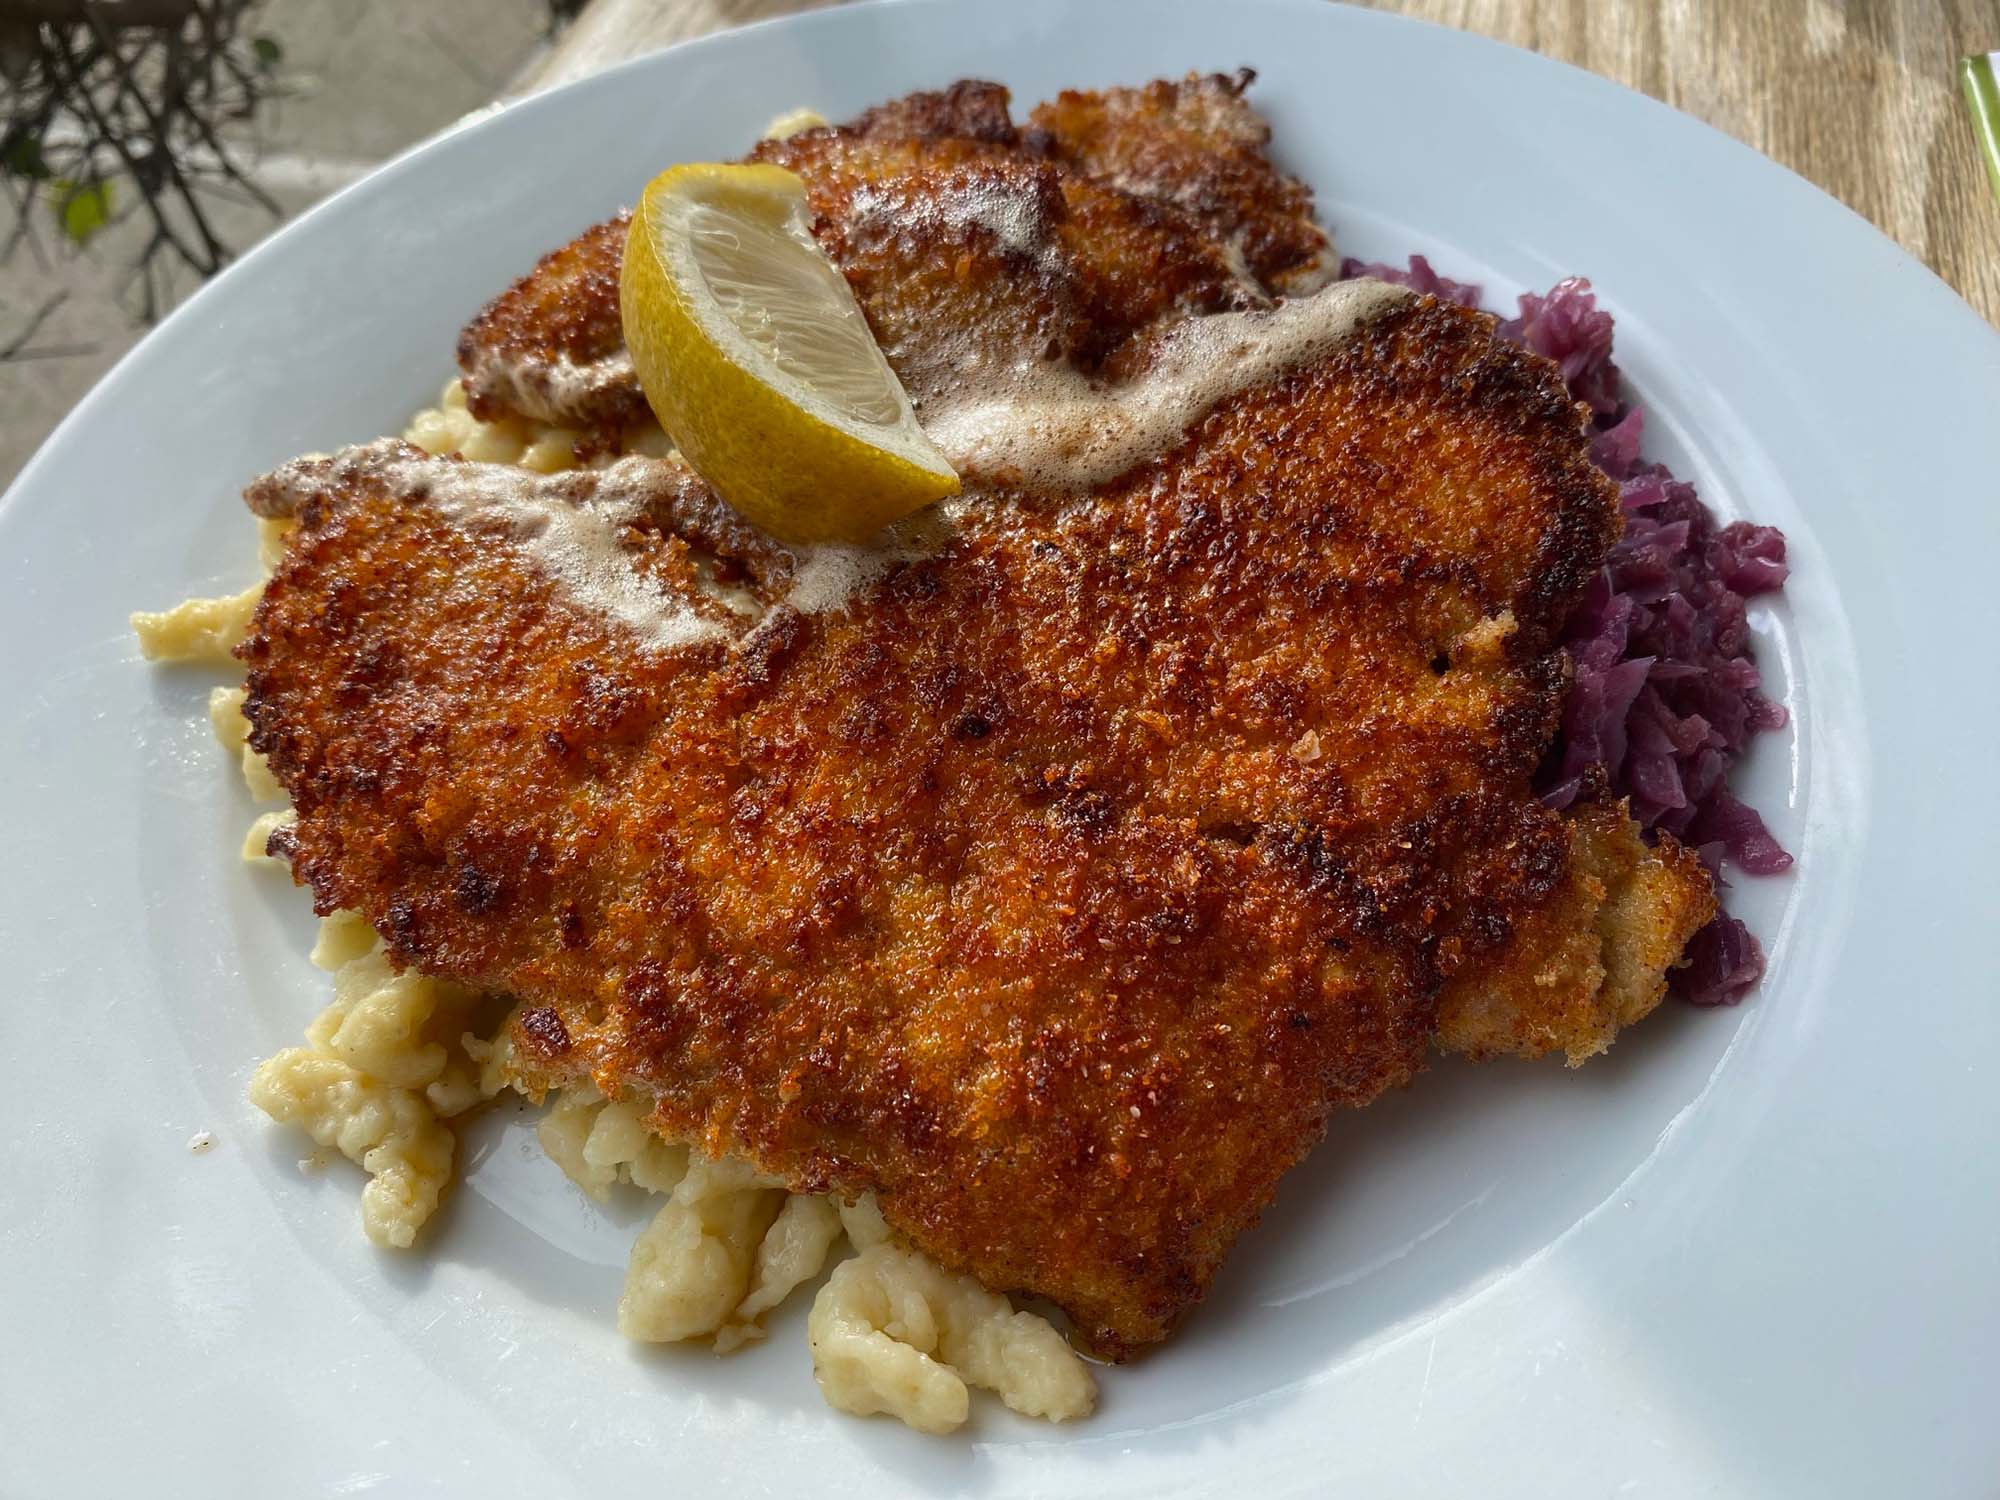 Pork schnitzel over a bed of spätzle, topped with a lemon wedge.